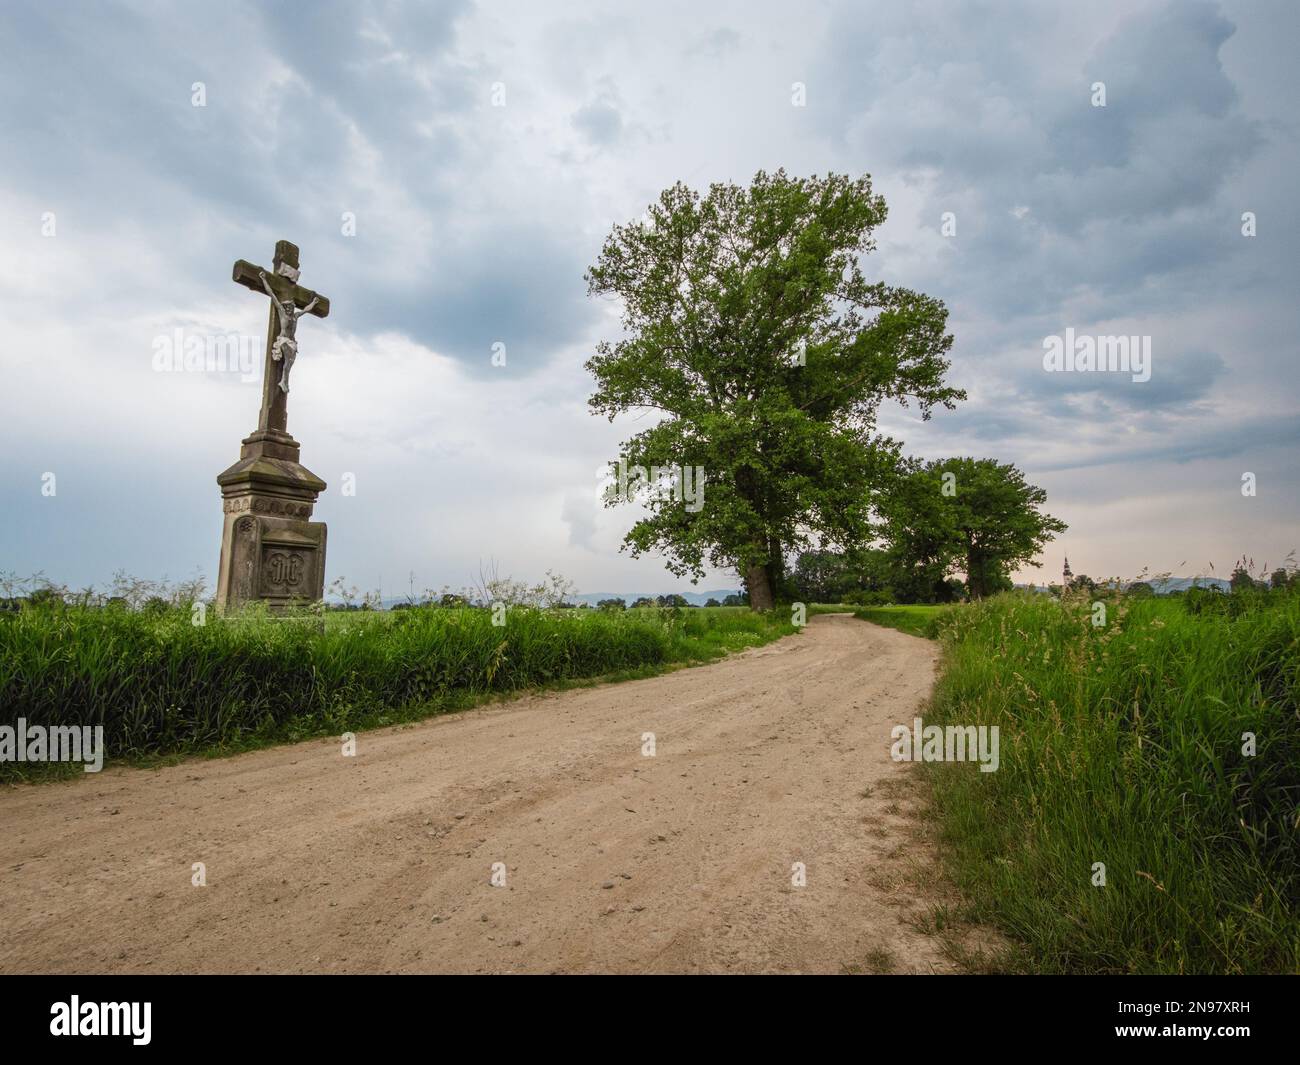 Field, dirt road with a roadside cross. Summer, rural landscape with stone cross, meadow and trees. Cloudy weather, no body, Poland. Stock Photo